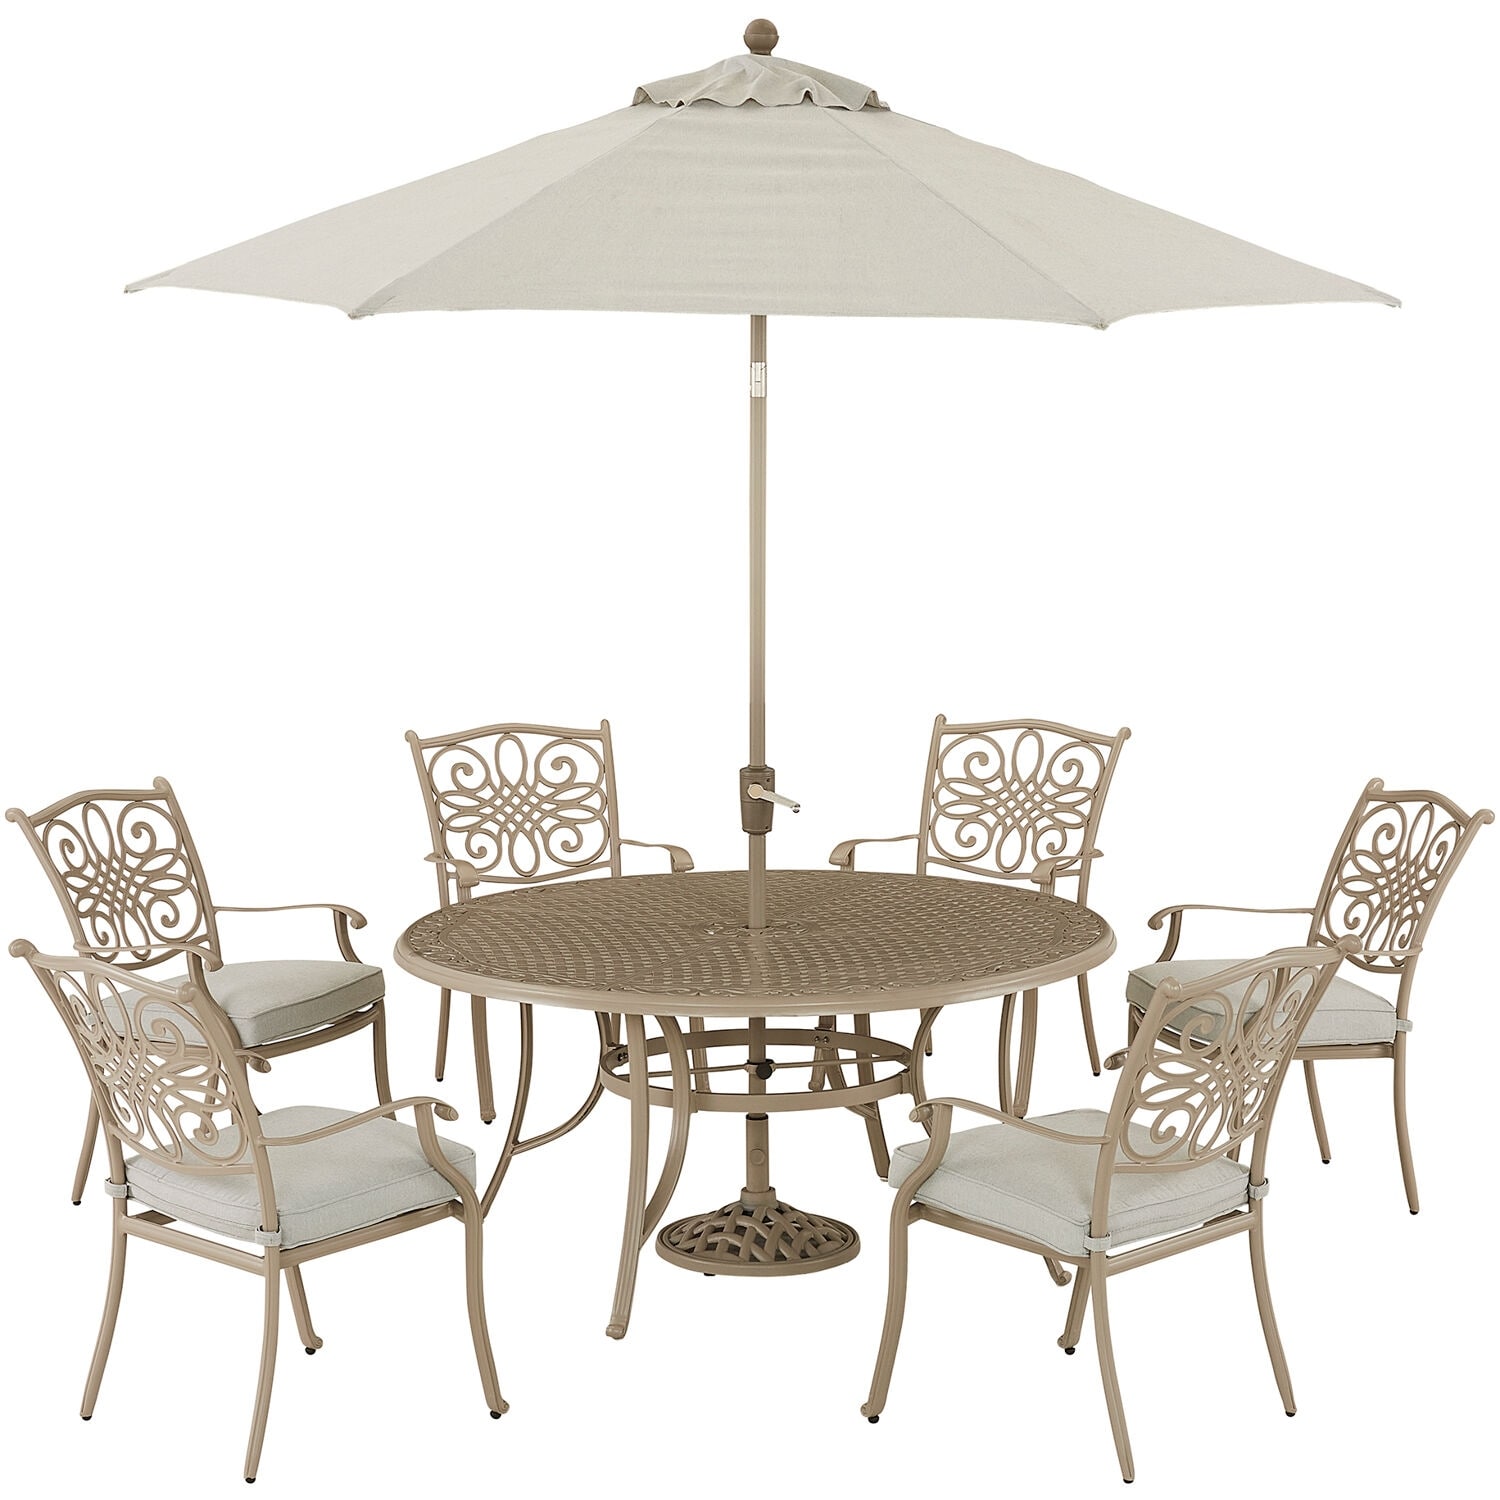 Hanover Traditions 7-piece Dining Set With 6 Stationary Chairs And 60-in. Table  9-ft. Umbrella  And Stand  Sand Finish